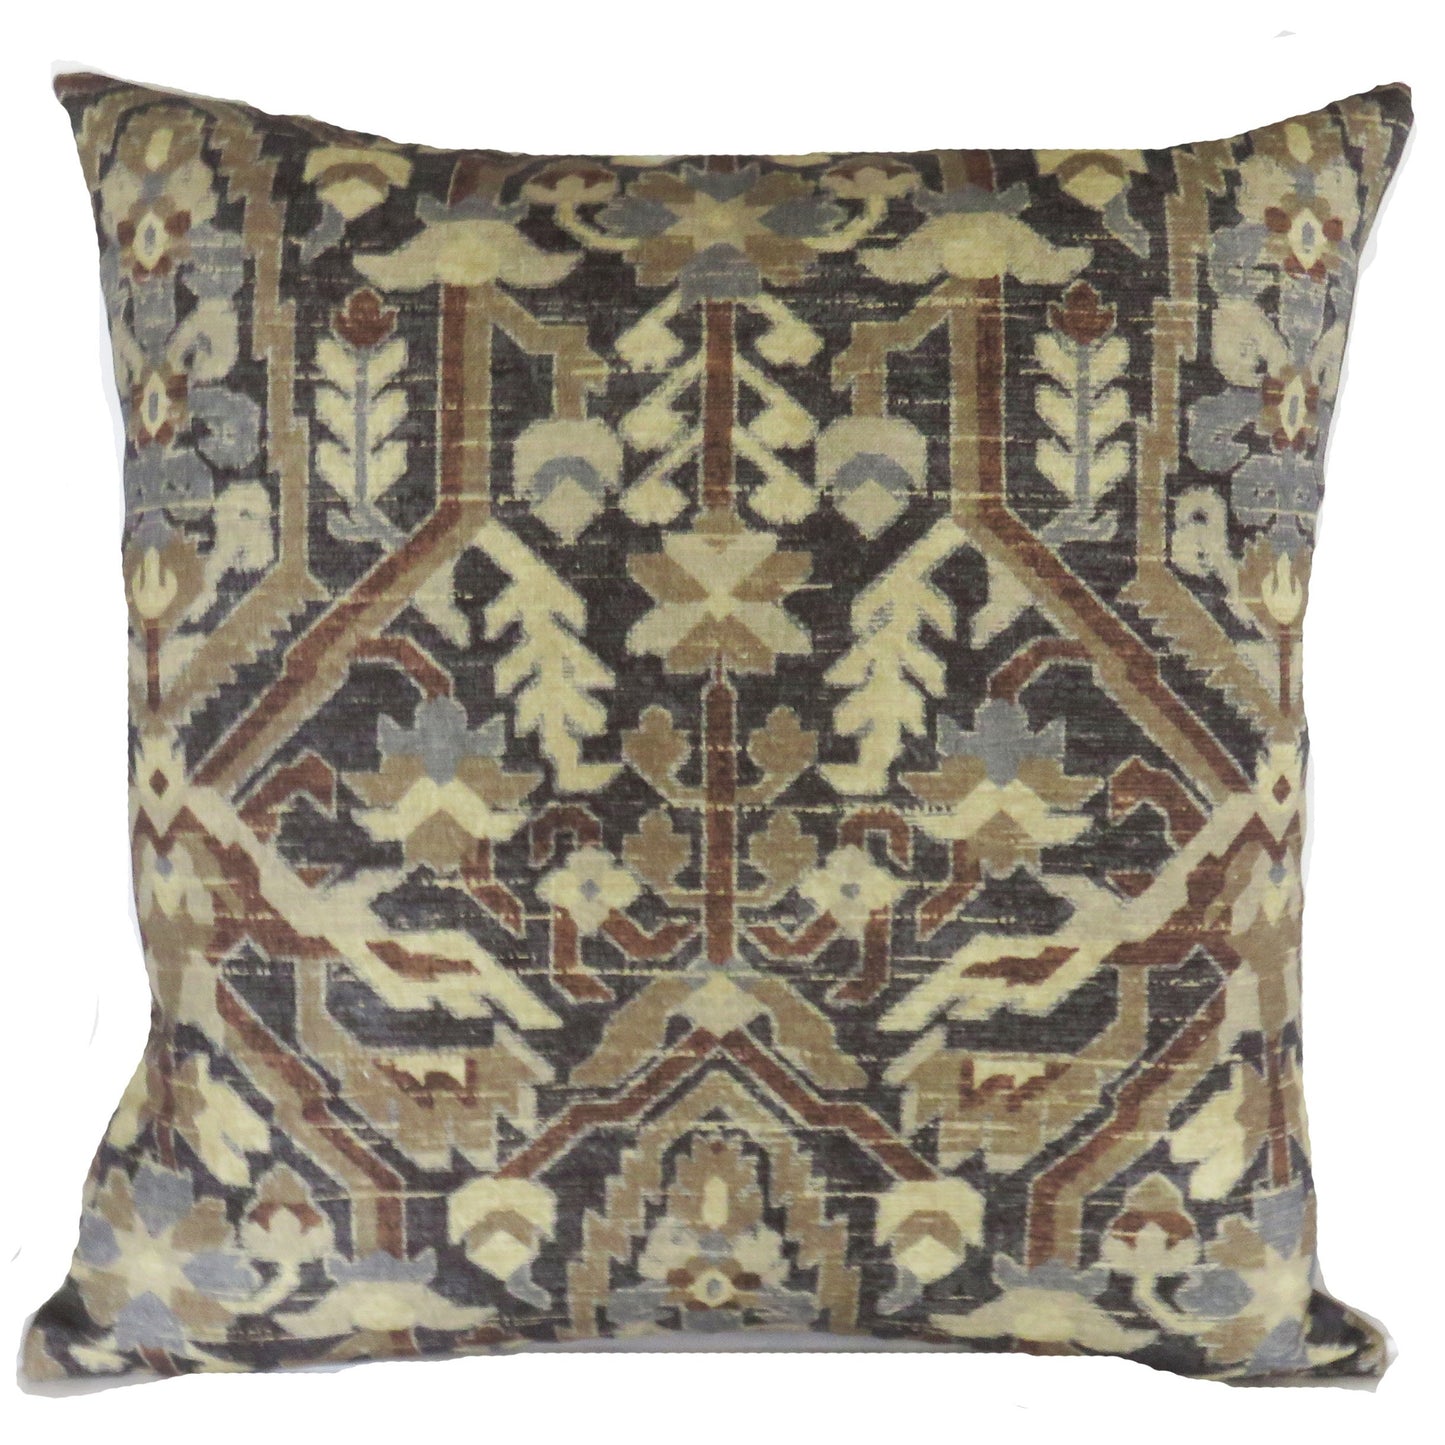 brown and grey geometric pillow cover made from P kaufmann Pasha Teak cotton fabric